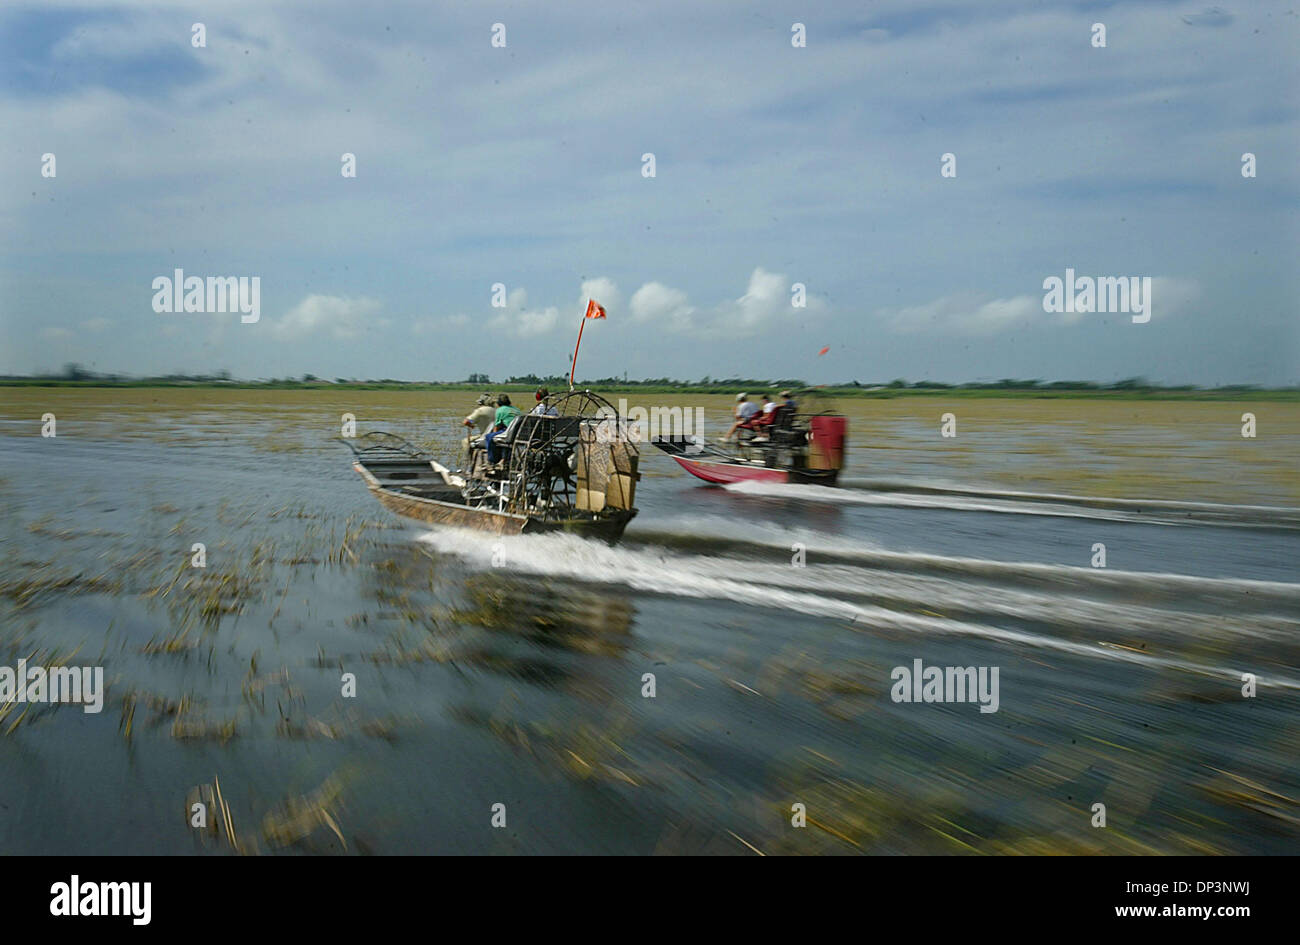 Jul 14, 2006; Clewiston, FL, USA; Two of five egg hunter airboats race along Lake Okeechobee to a designated site to search for nests.  Florida Fish and Wildlife officials, Alligator farmers, and volunteers, hunt for alligator eggs each summer in the thick marsh of Lake Okeechobee.  In an effort to control the alligator population, officials report that egg hunters recovered 150,00 Stock Photo